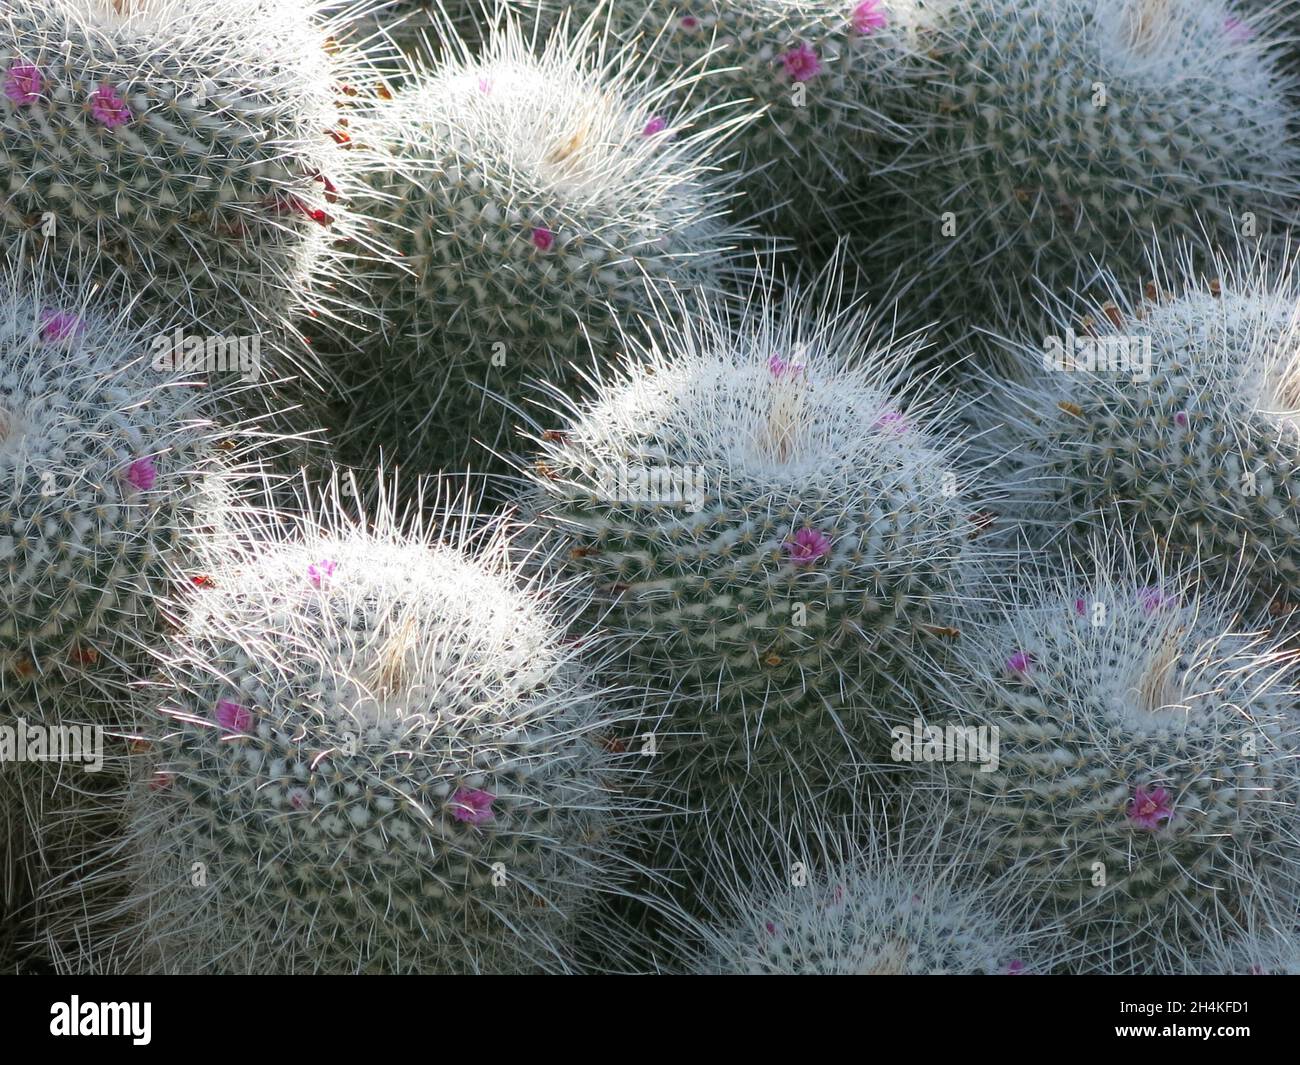 Close-up of the spiny, woolly mounds of the cactus 'mammillaria geminispina', also known as 'whitey', in a display of succulents at Kew Gardens. Stock Photo